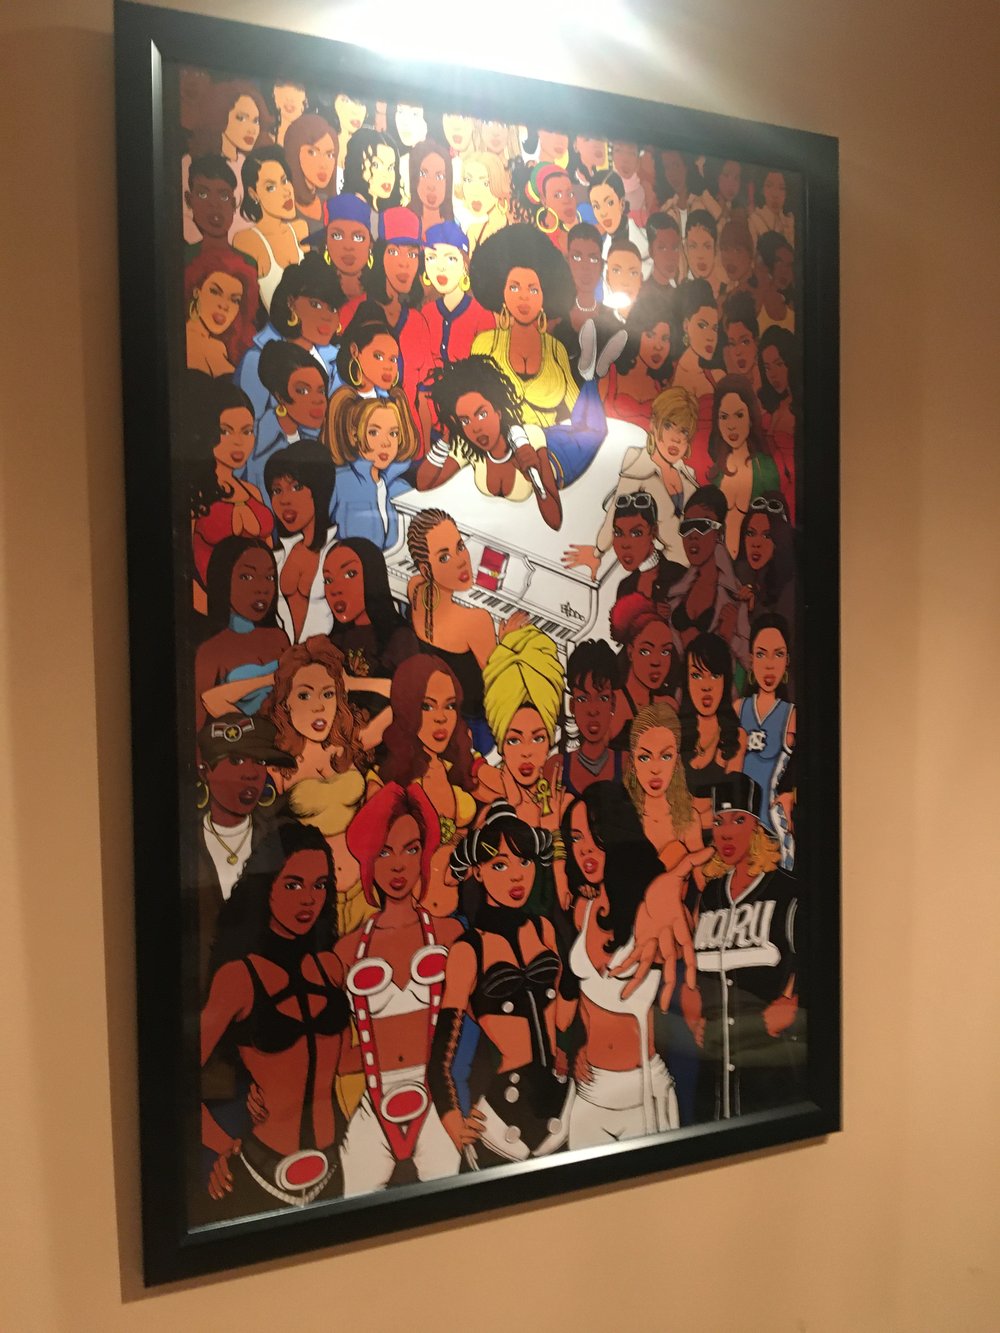 The Golden Age of RnB by Beddo Print or Poster